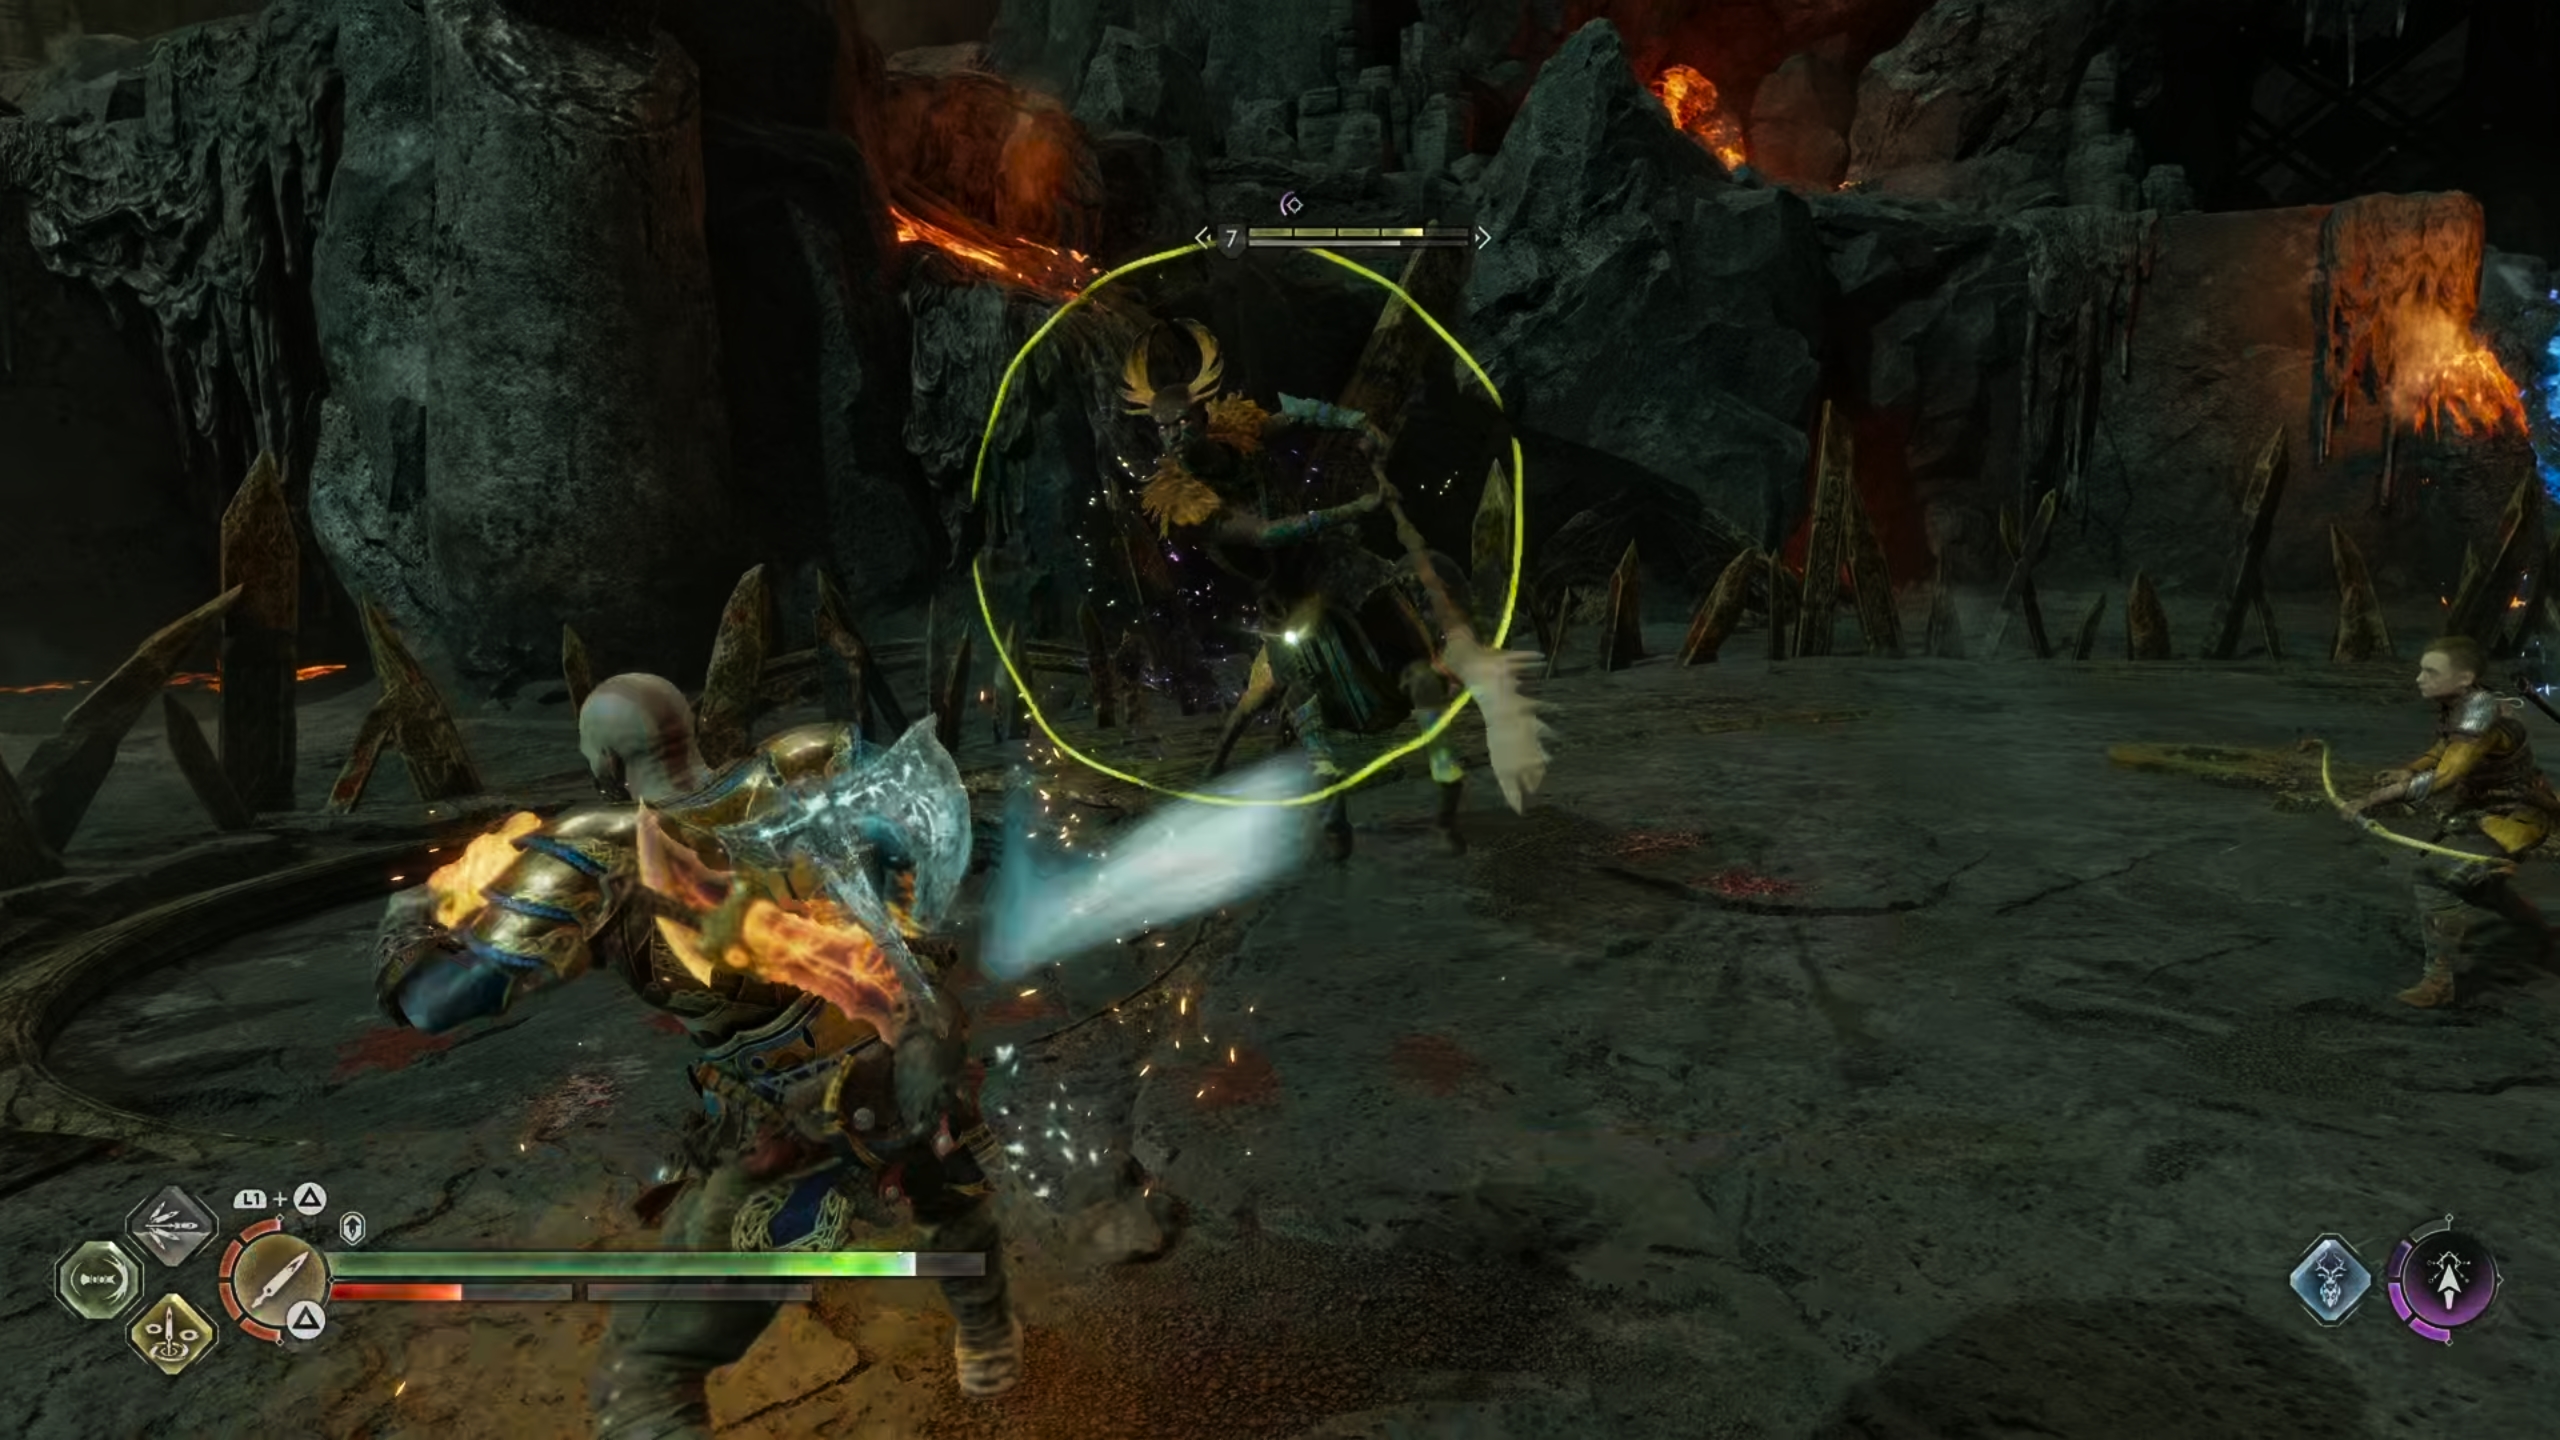 The most common attack that the Fierce Stalker uses is a sweeping melee combo.